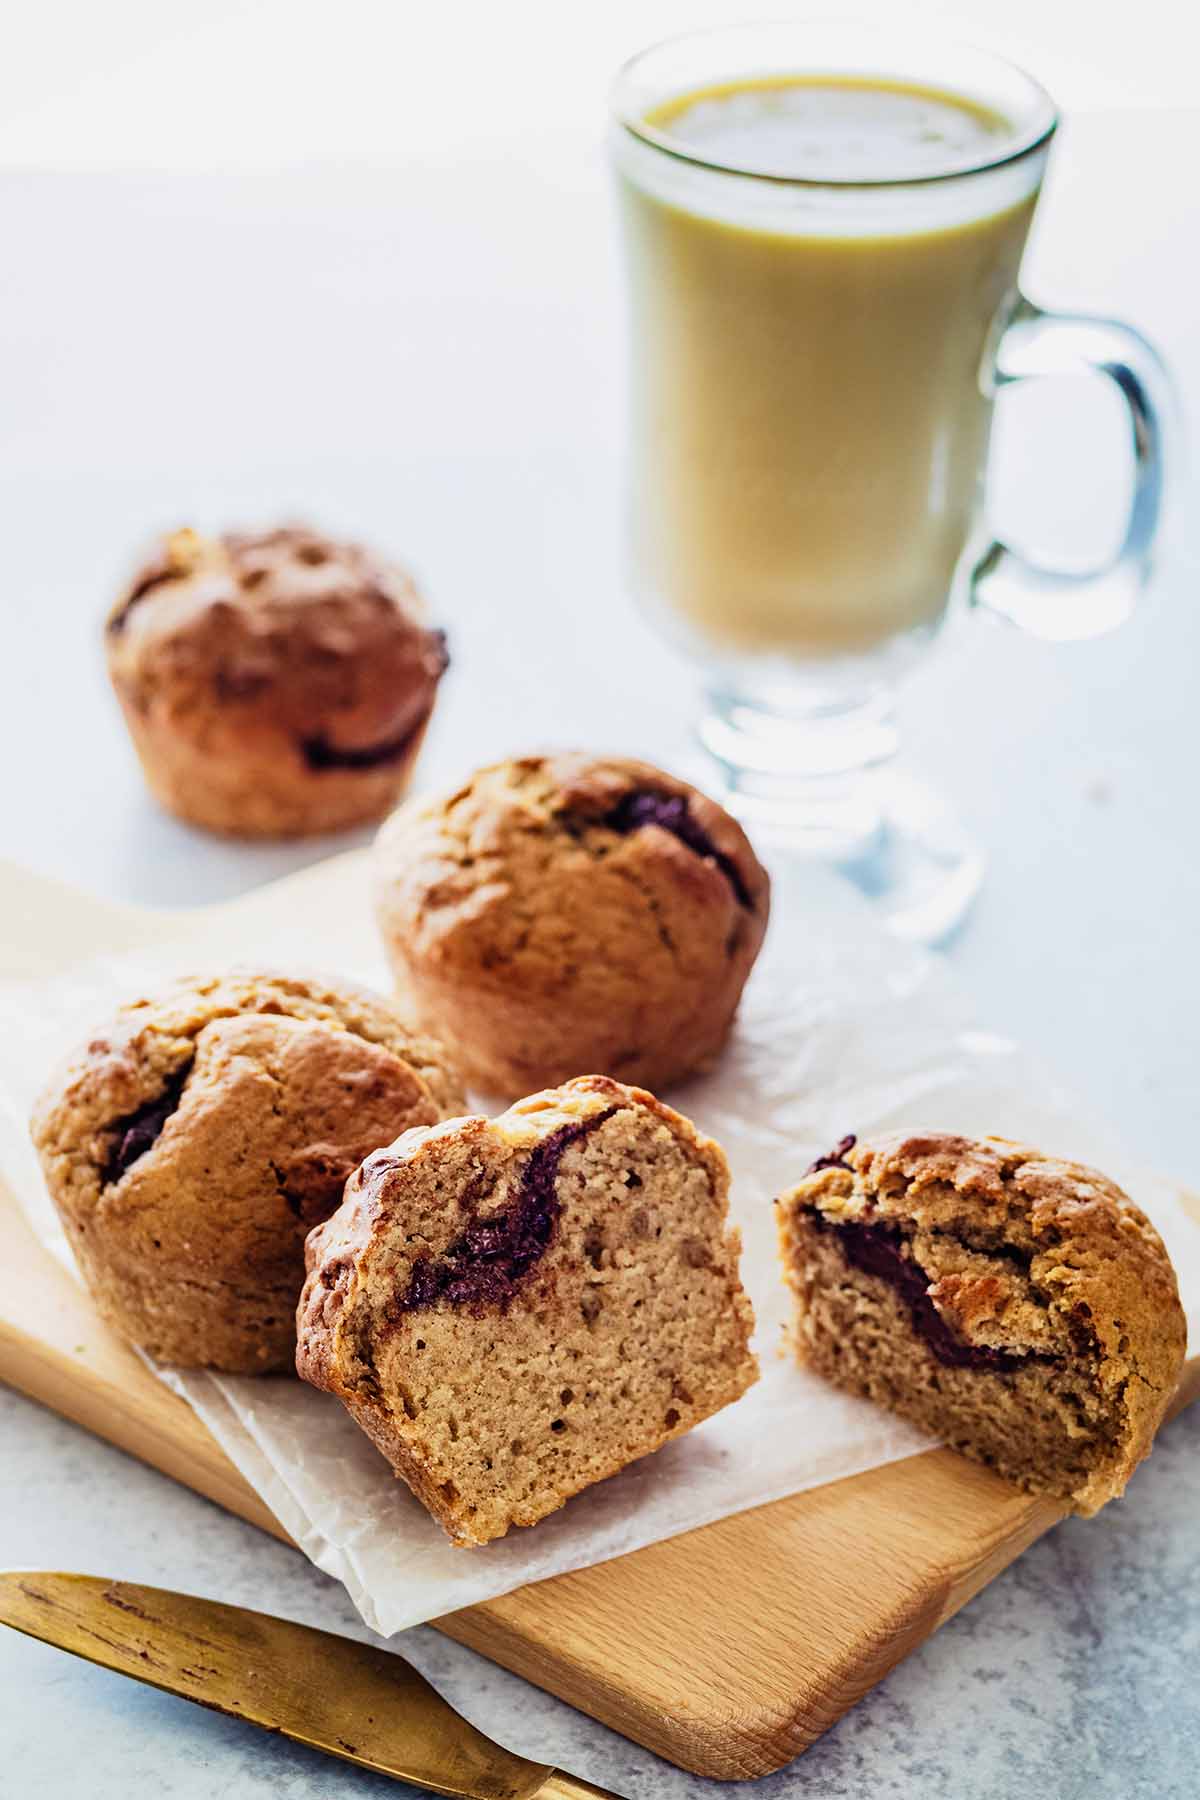 Four Nutella muffins on a small cutting board. One of the muffins is cut in half to reveal the Nutella filling. A gold knife and glass mug filled with tea are off to the side.